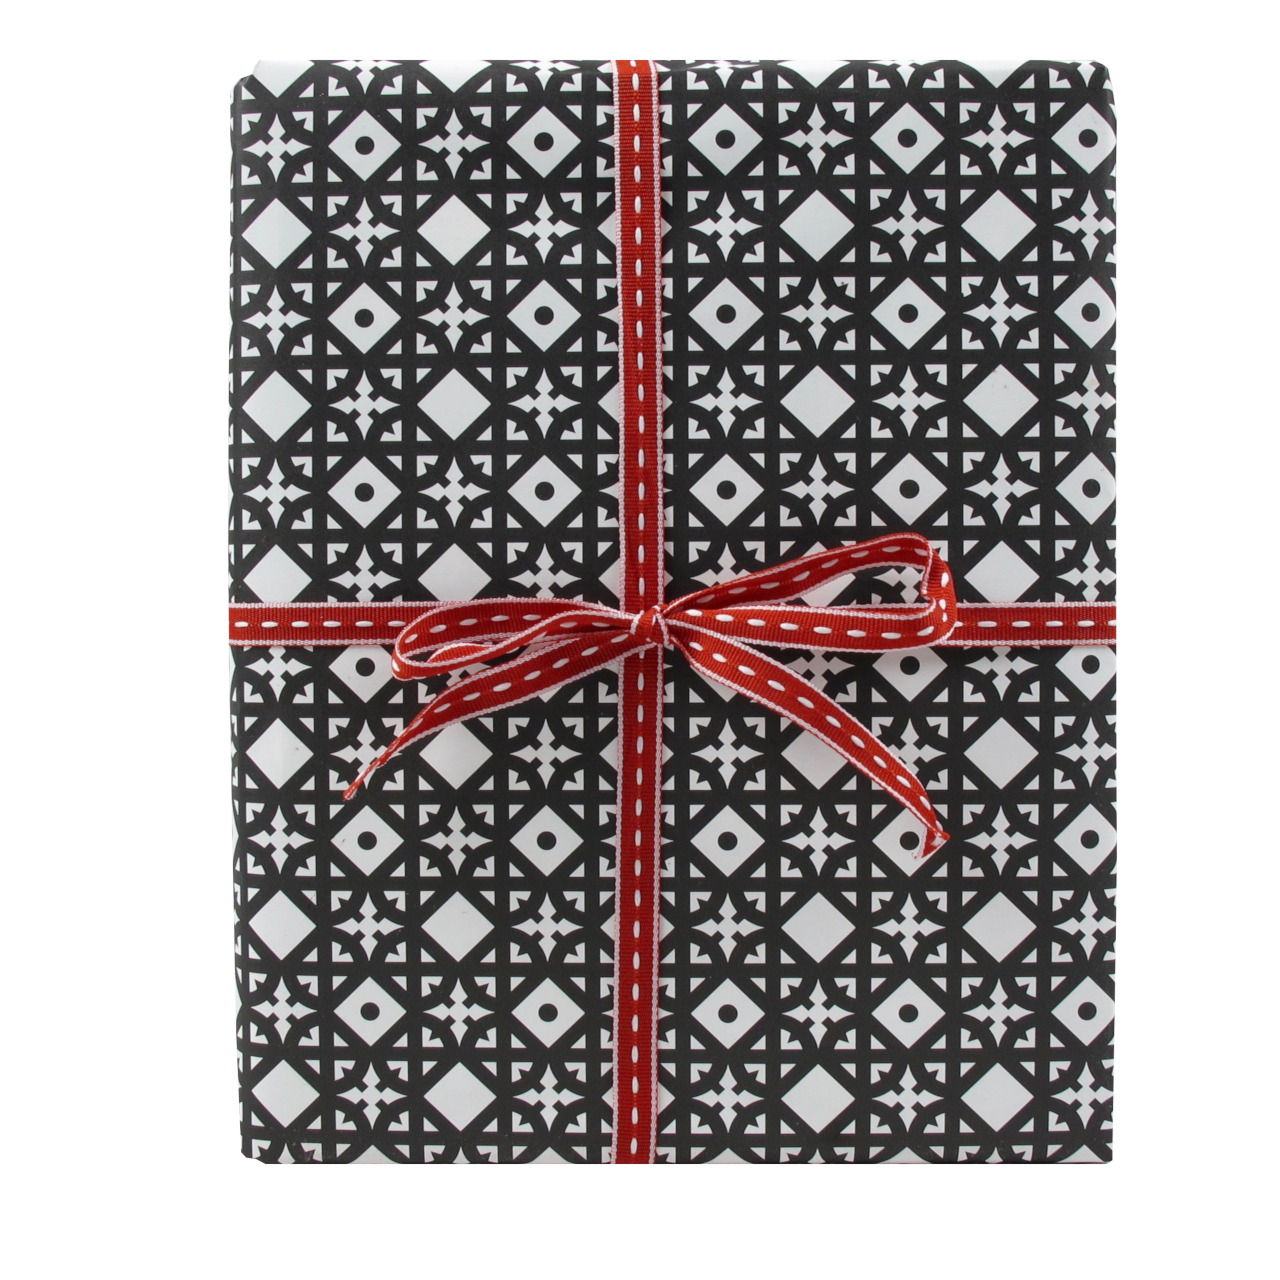 Black Bough 10 Sheets of Black and White Tudor Giftwrap